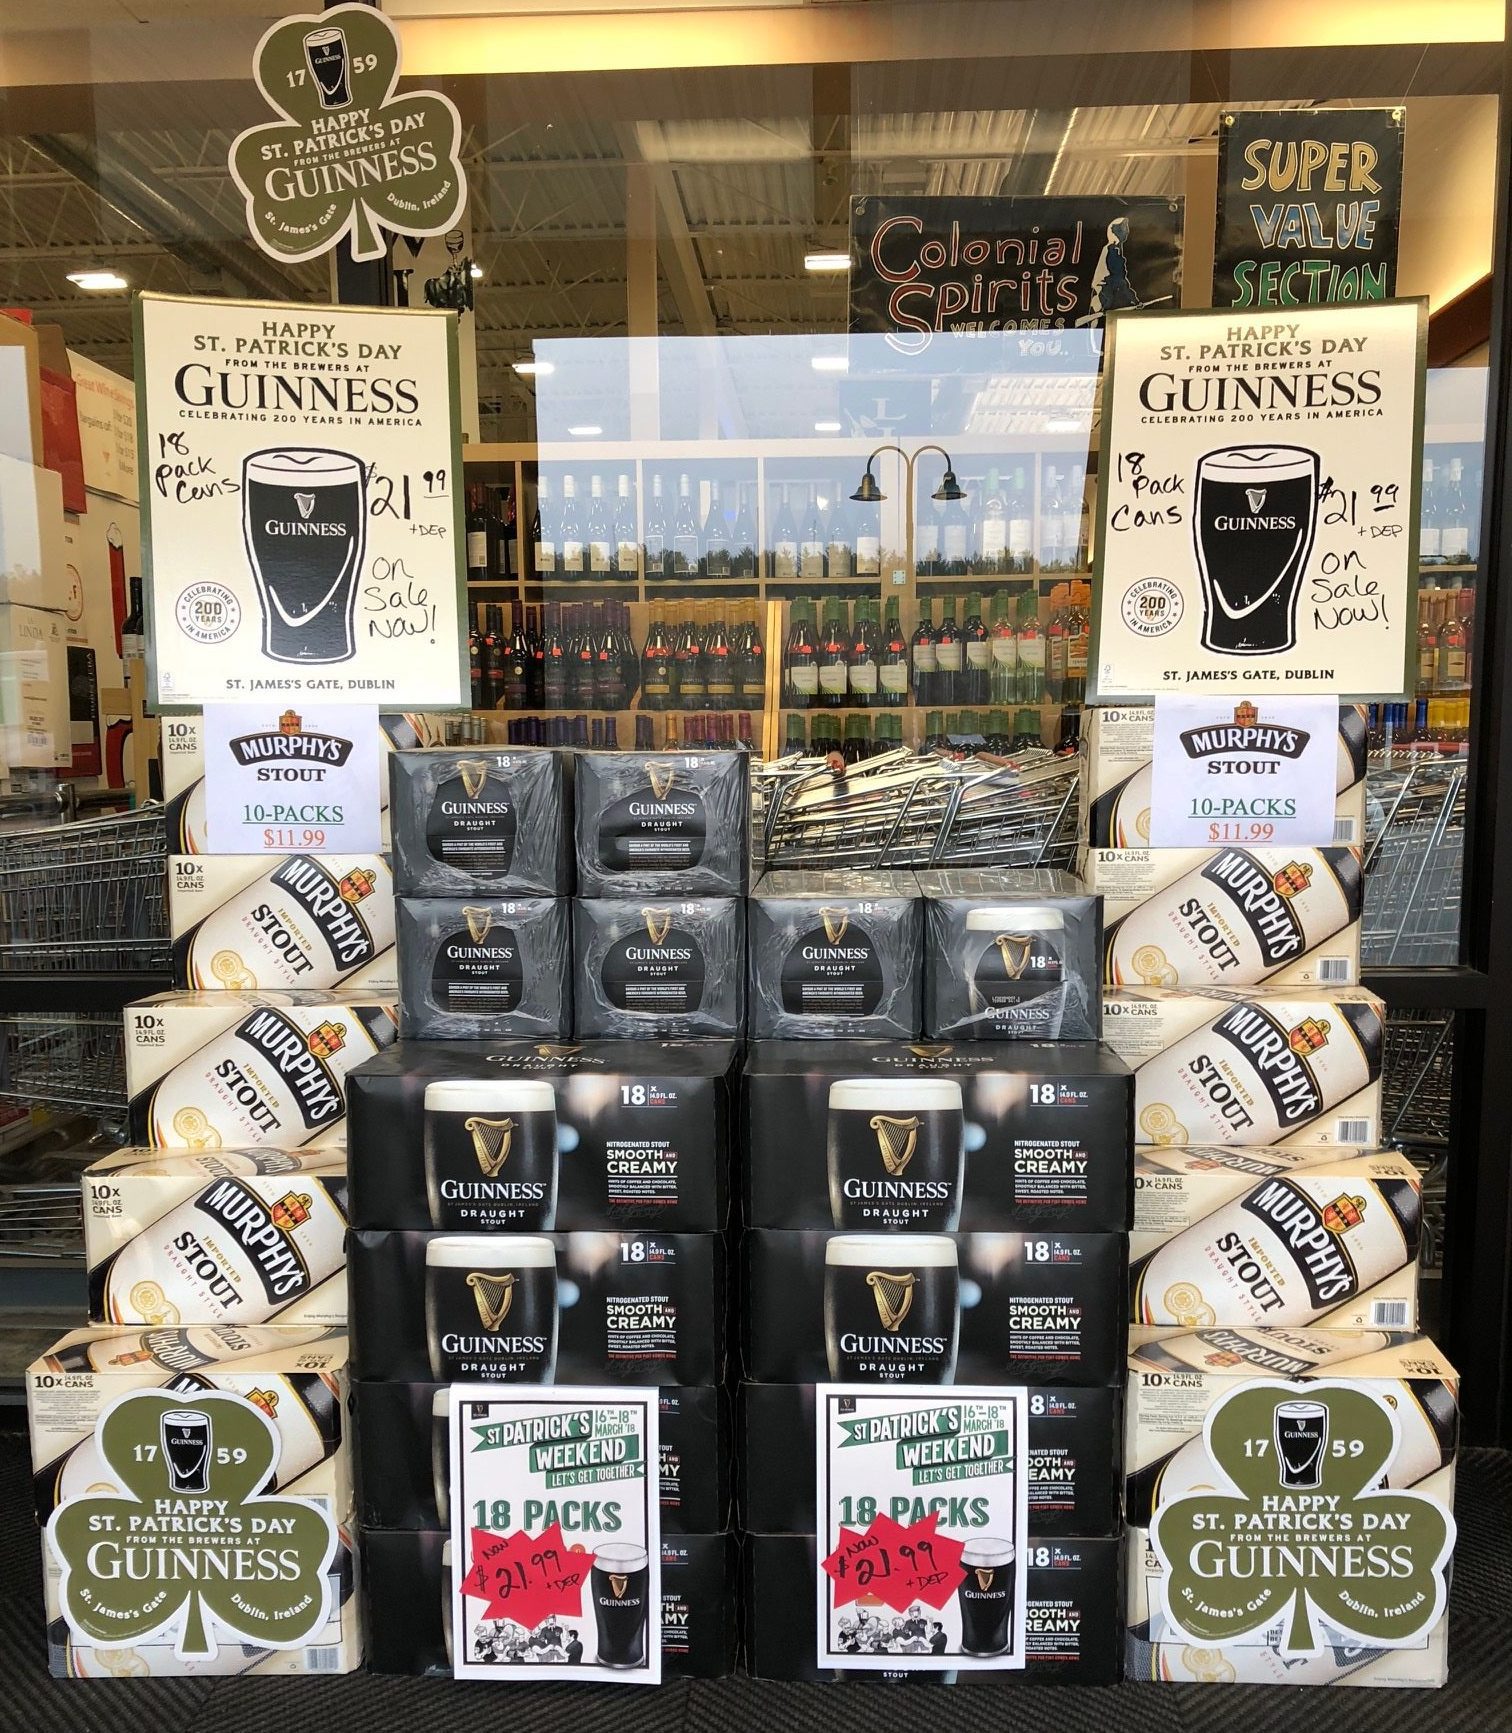 We have some great deals for St. Patty's Day and all of the products you'll need!